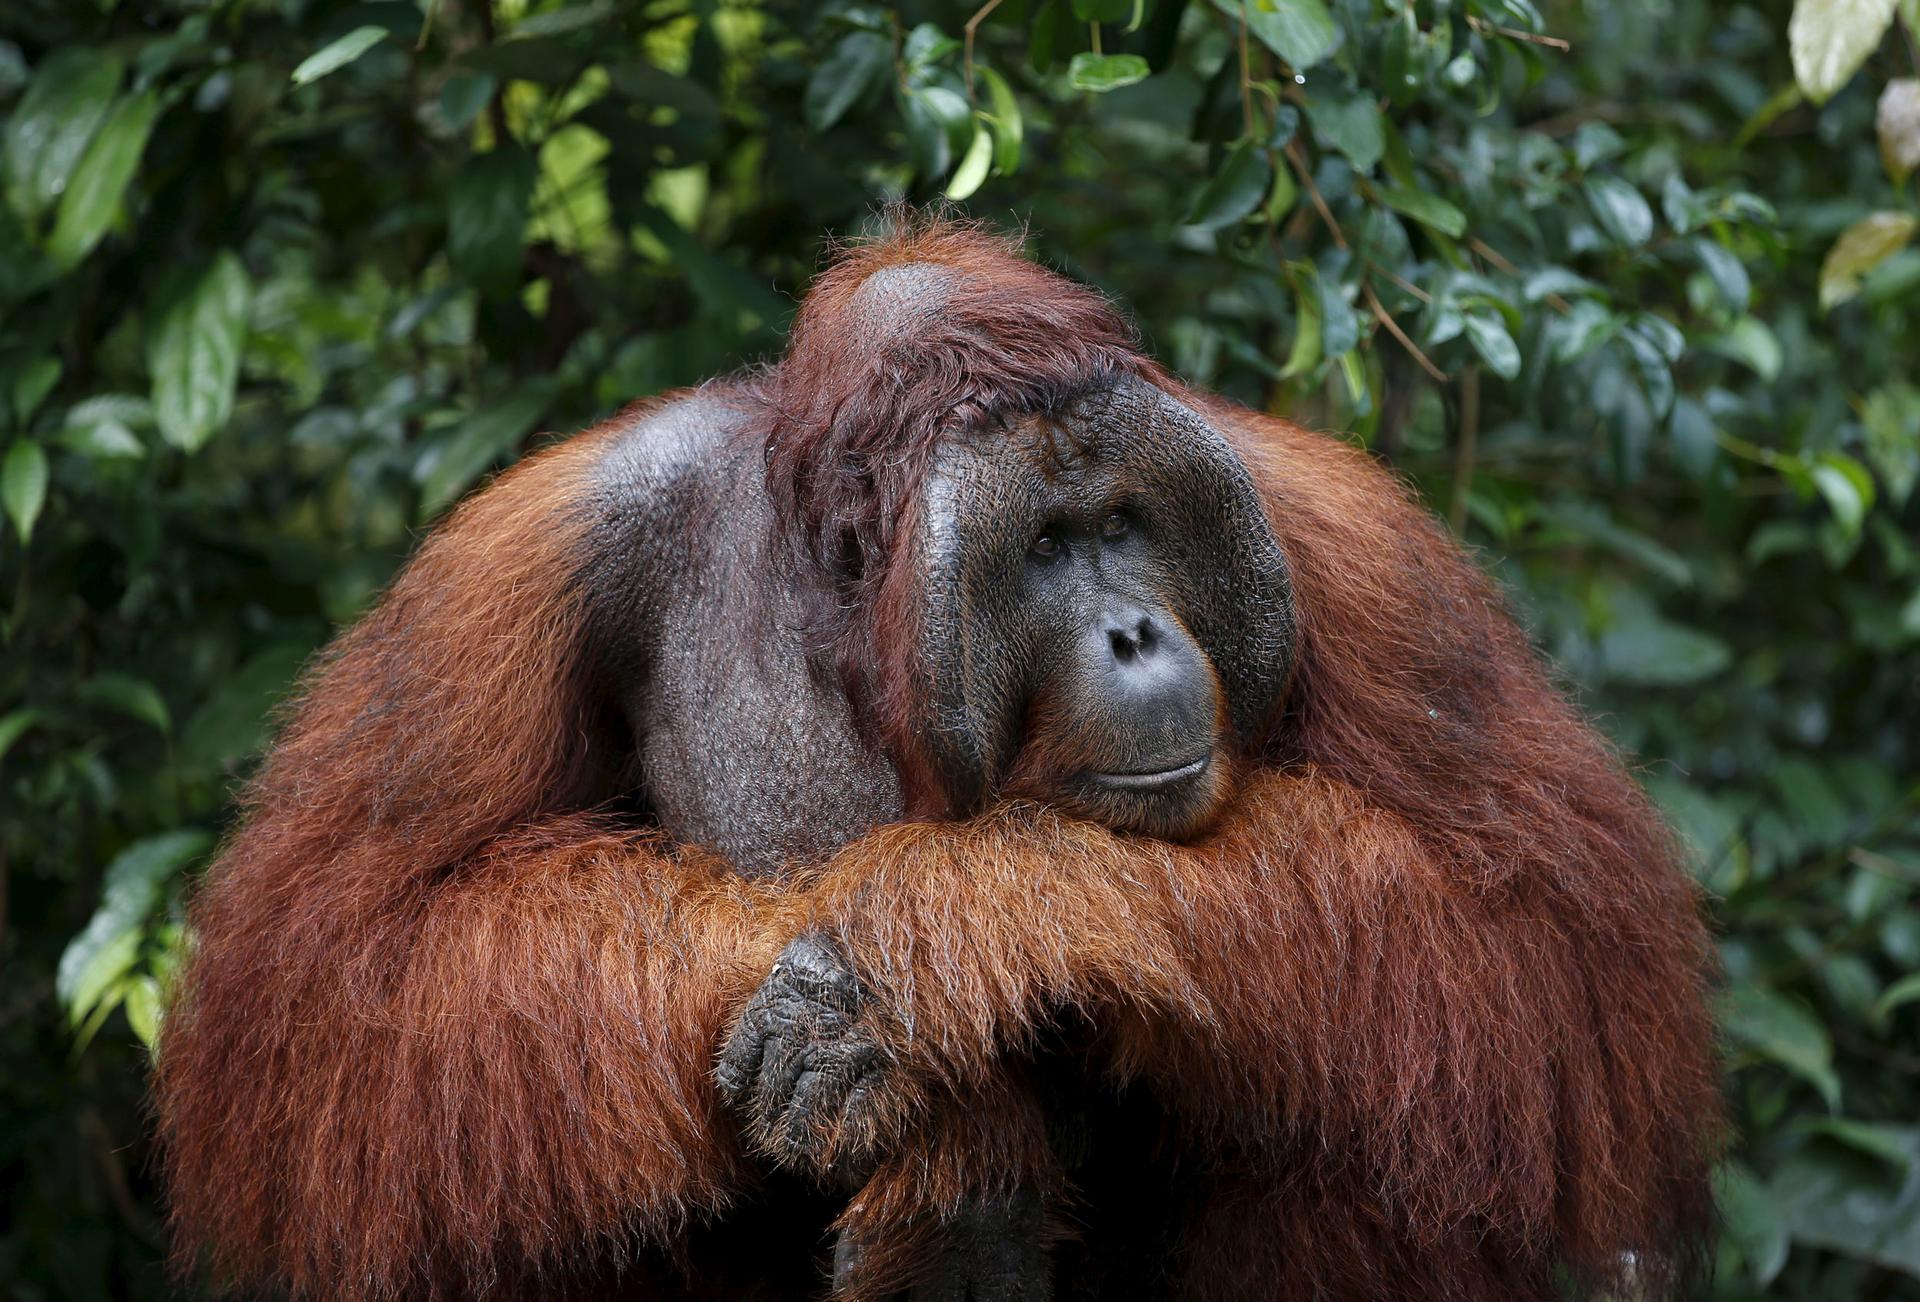 A male orangutan waits at a feeding station at Camp Leakey in Tanjung Puting National Park in Central Kalimantan province, Indonesia.